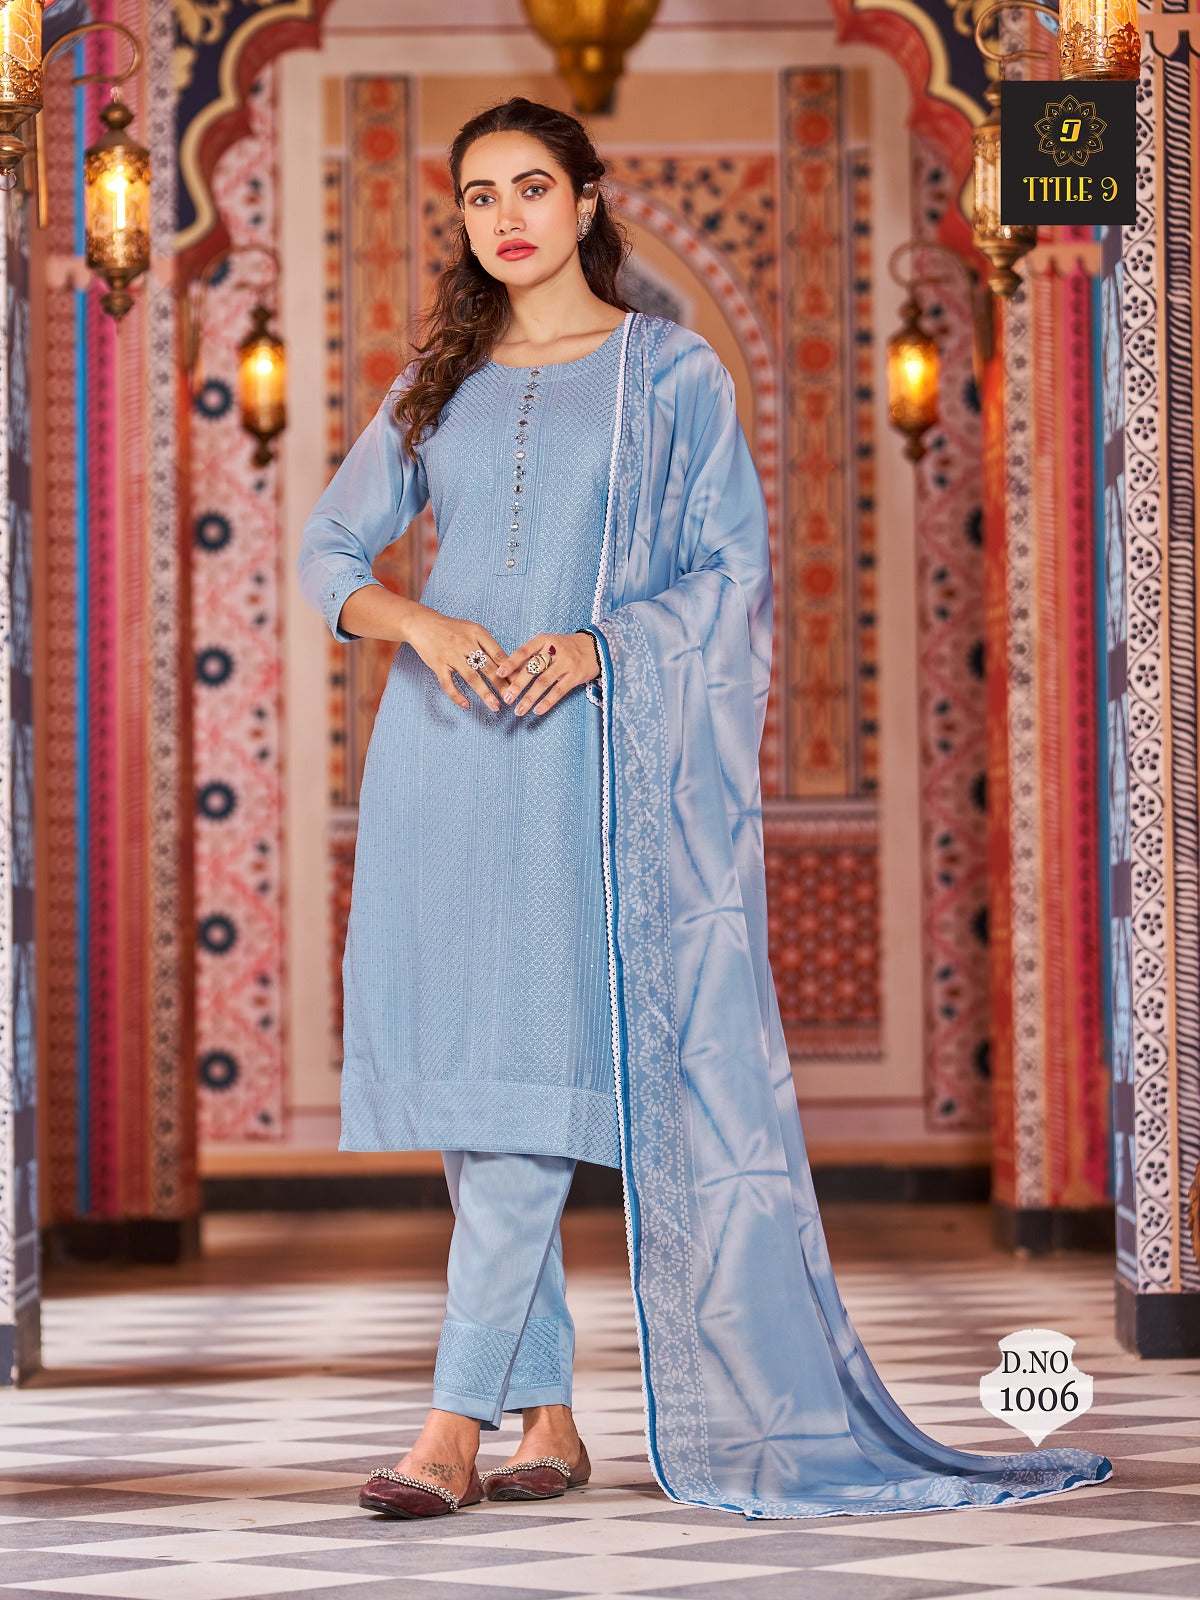 Inaya Title 9 Russian Silk Readymade Pant Style Suits